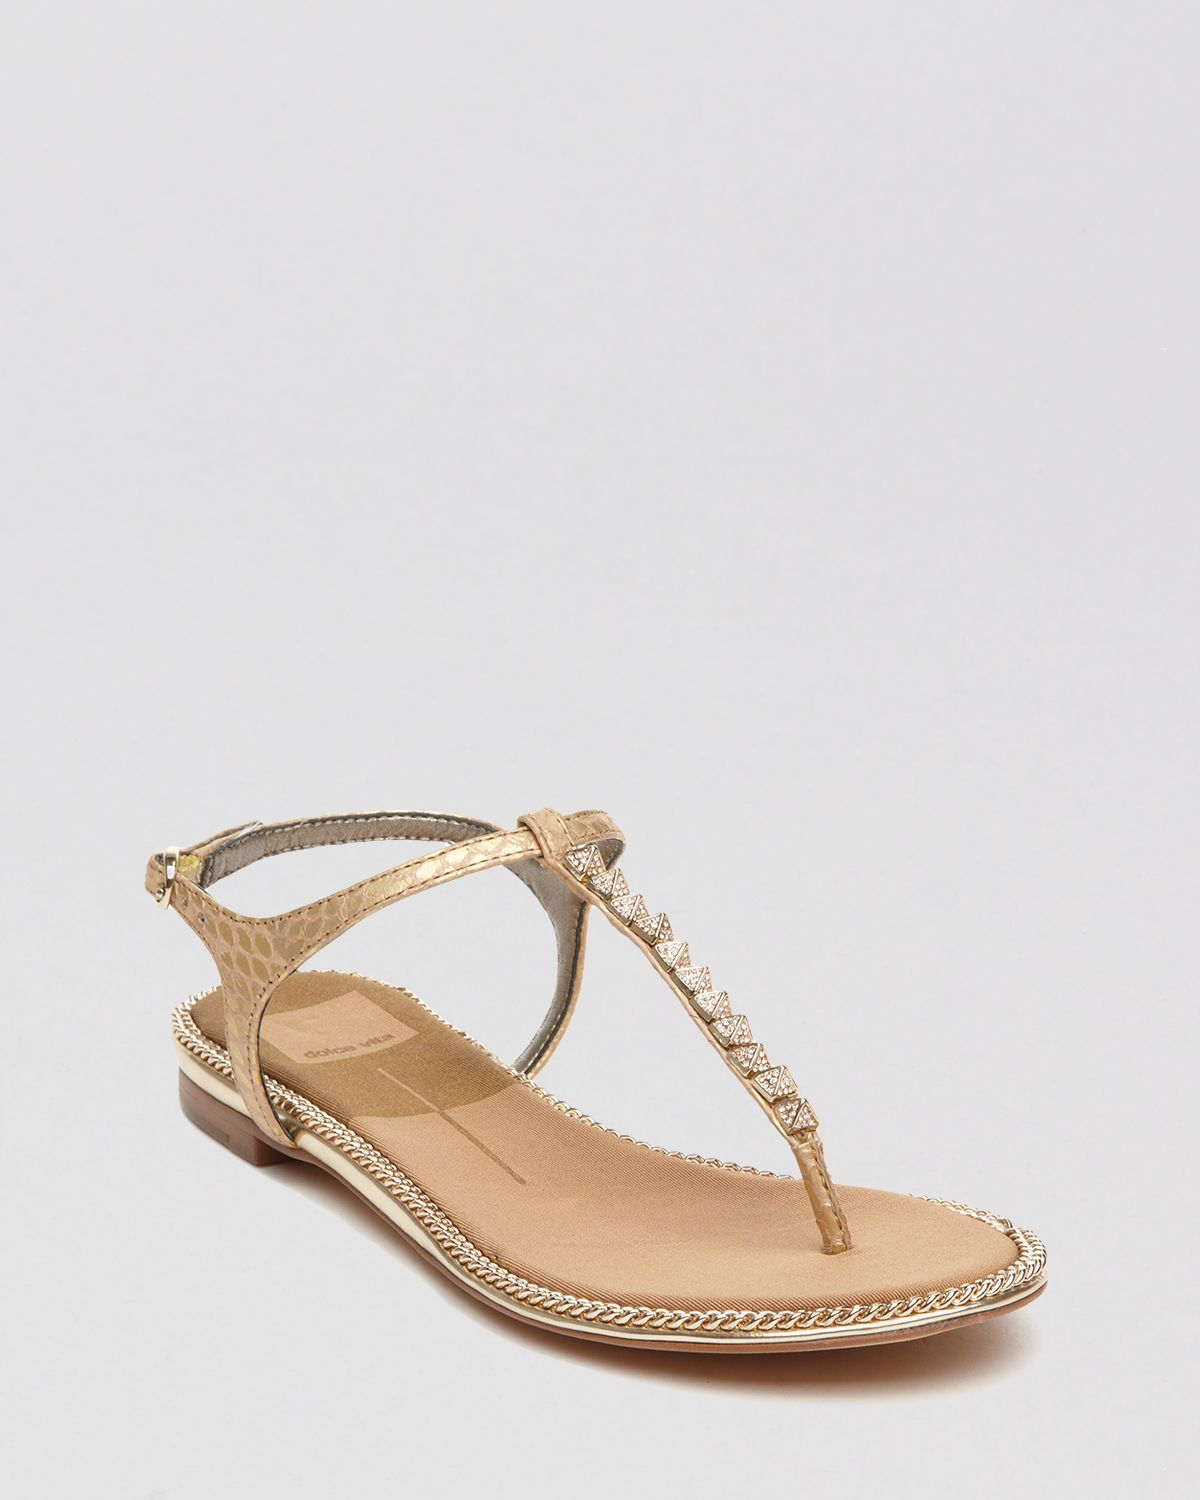 Lyst - Dolce vita Flat Thong Sandals Ensley Studded T Strap in Metallic